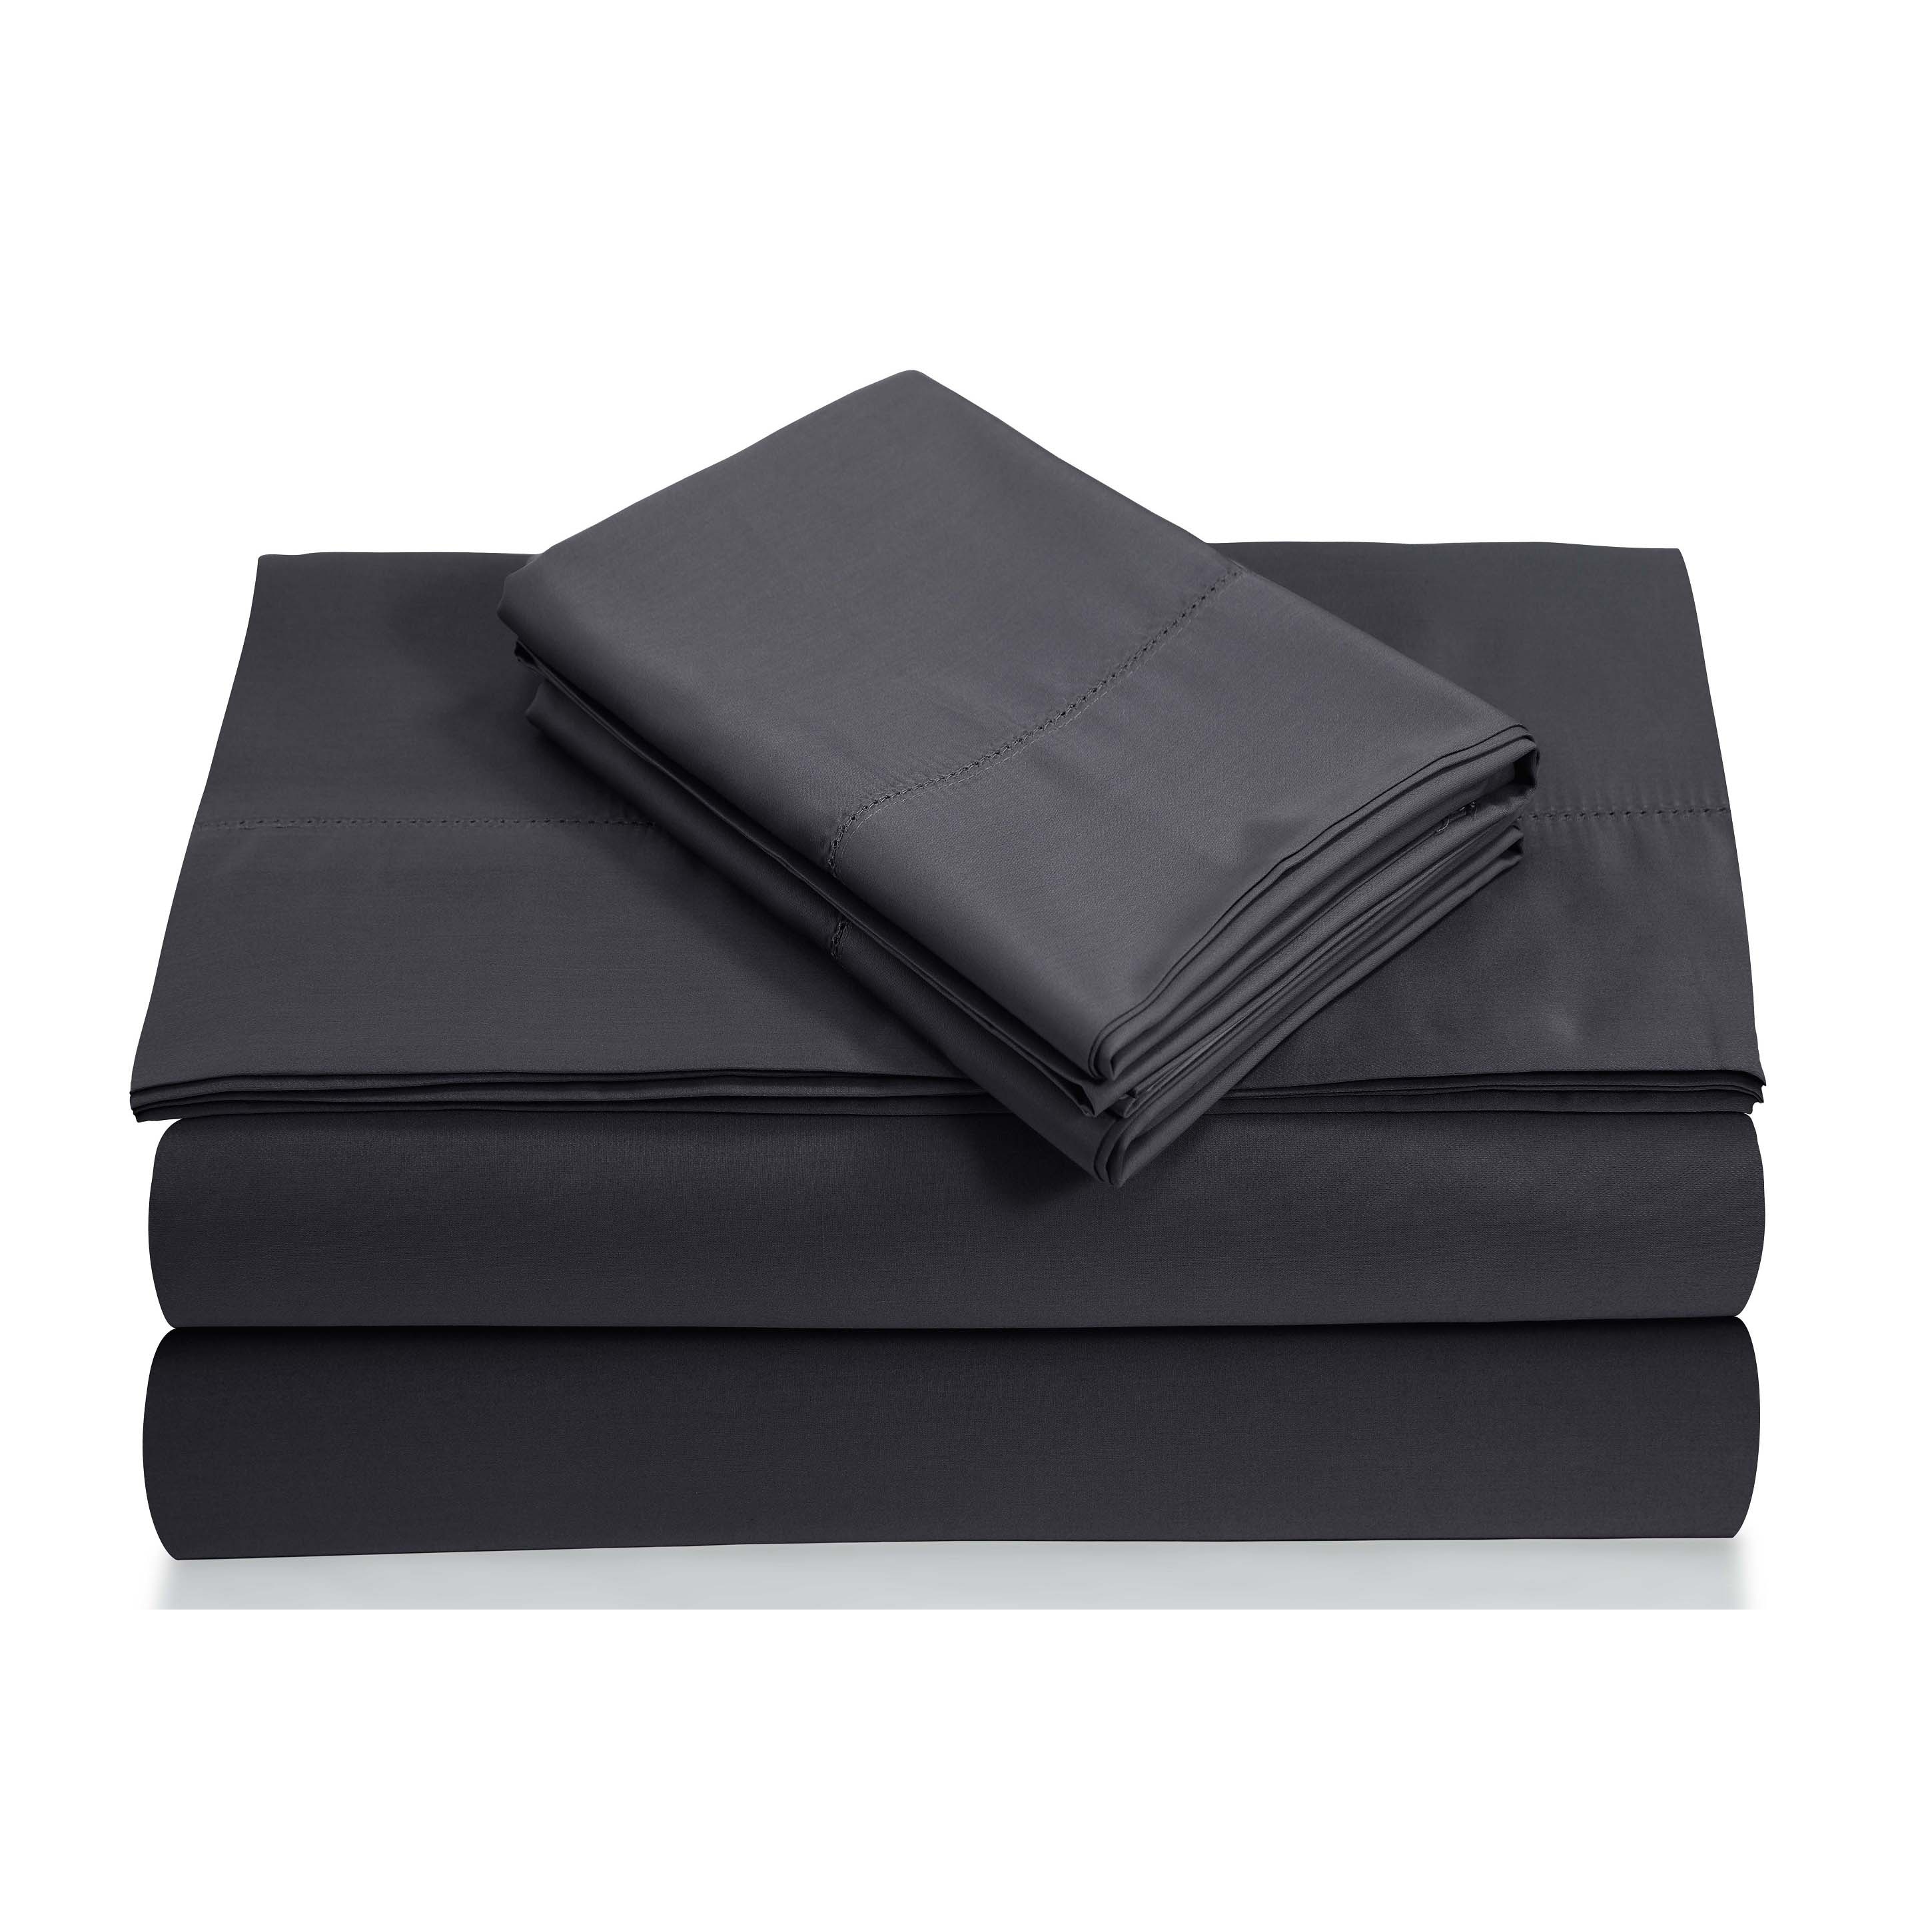 https://ak1.ostkcdn.com/images/products/is/images/direct/ef881eeb22ec8cfbd1c7874db8240a38bc4f3a6a/Egyptian-Cotton-800-TC-Deep-Pocket-Bed-Sheet-Set-with-Luxury-size-Flat.jpg